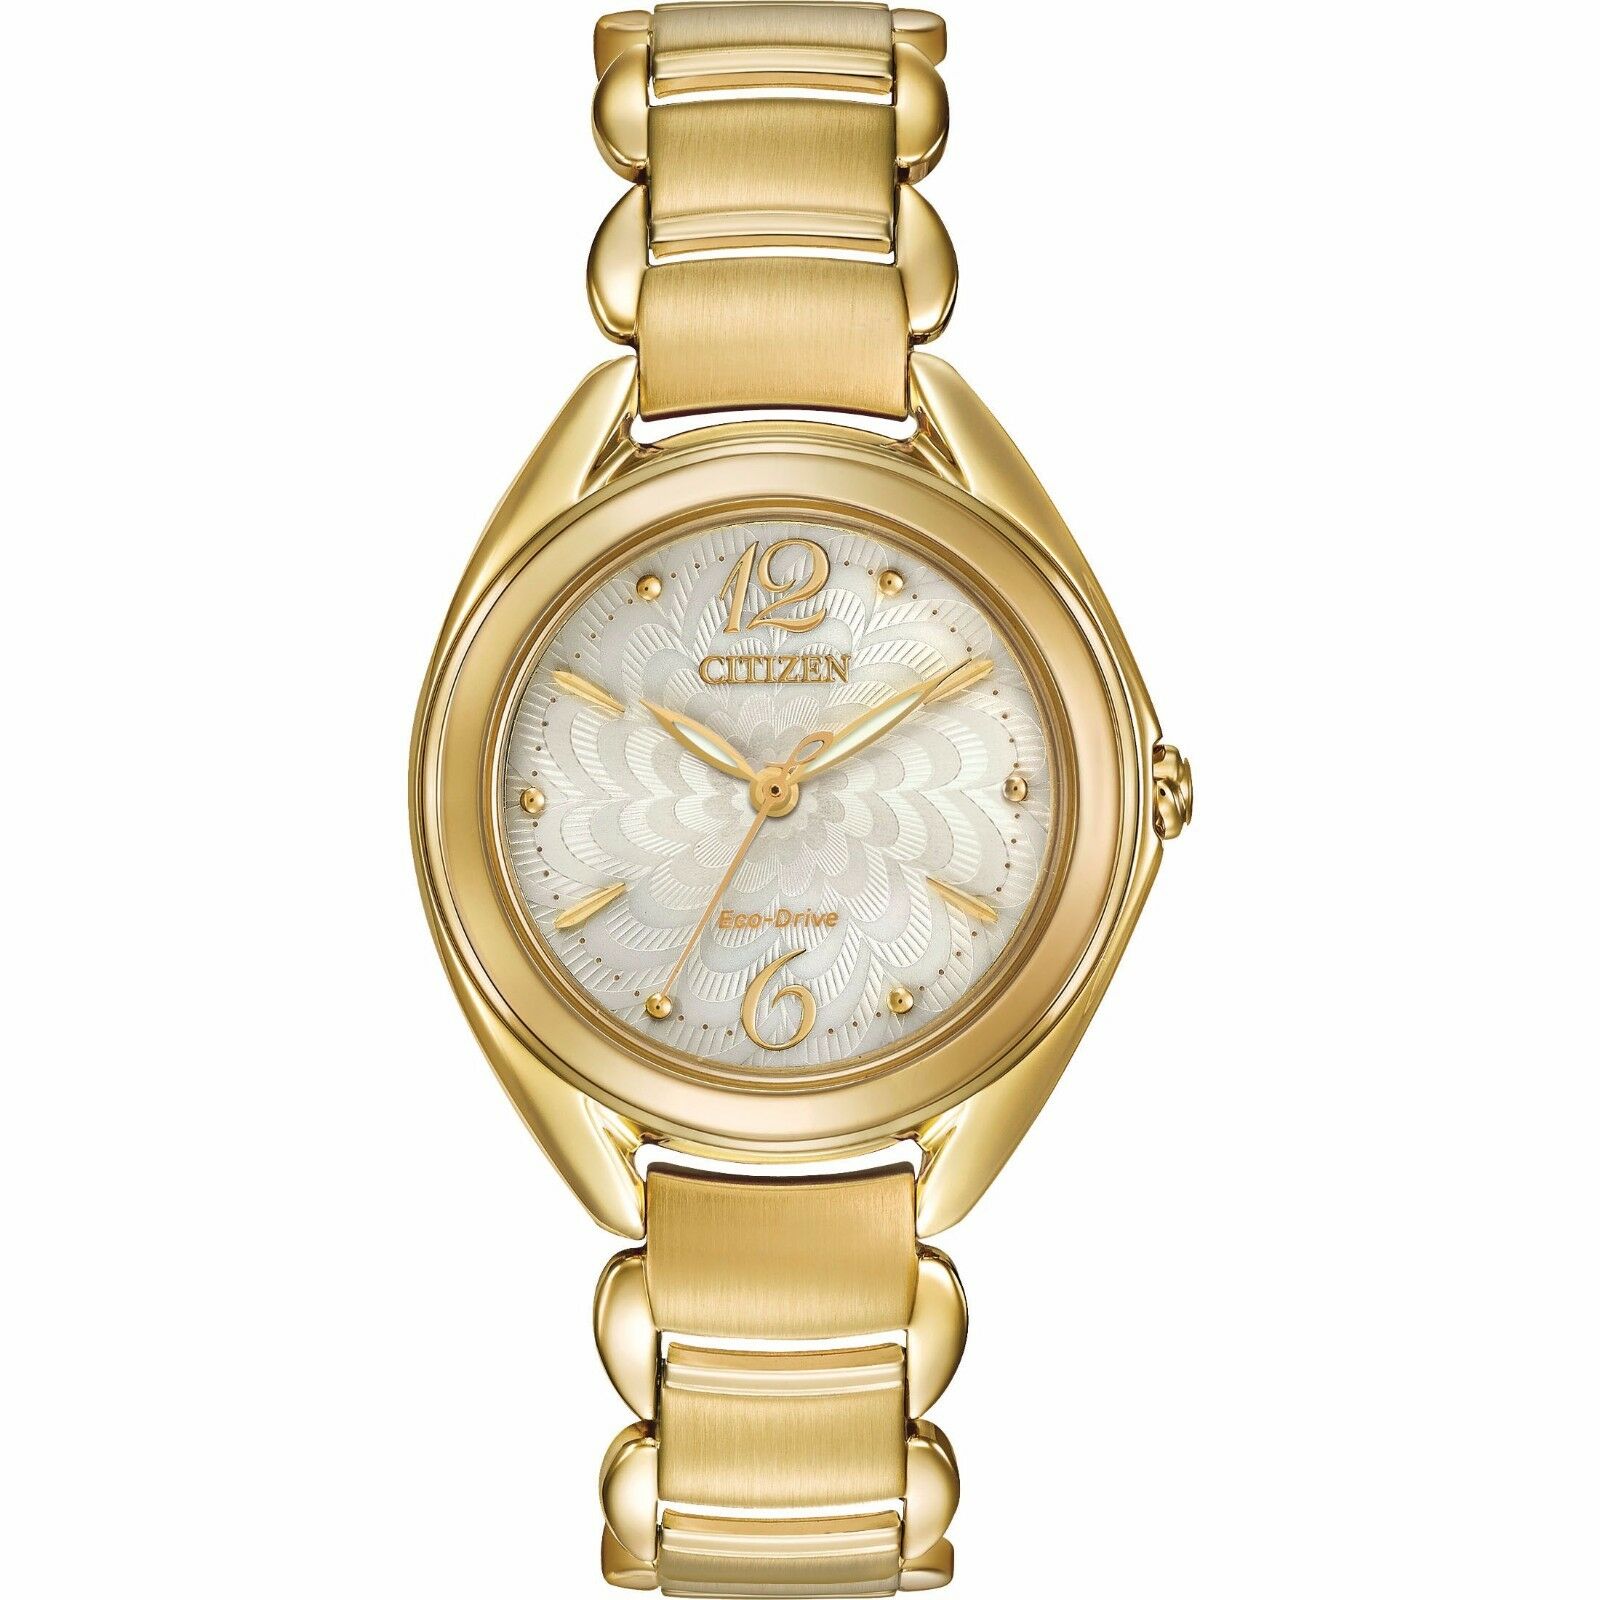 Đồng hồ Nữ Citizen Eco-Drive Silhouette Women's Gold-Tone Ivory Dial 31mm Watch FE2072-89A